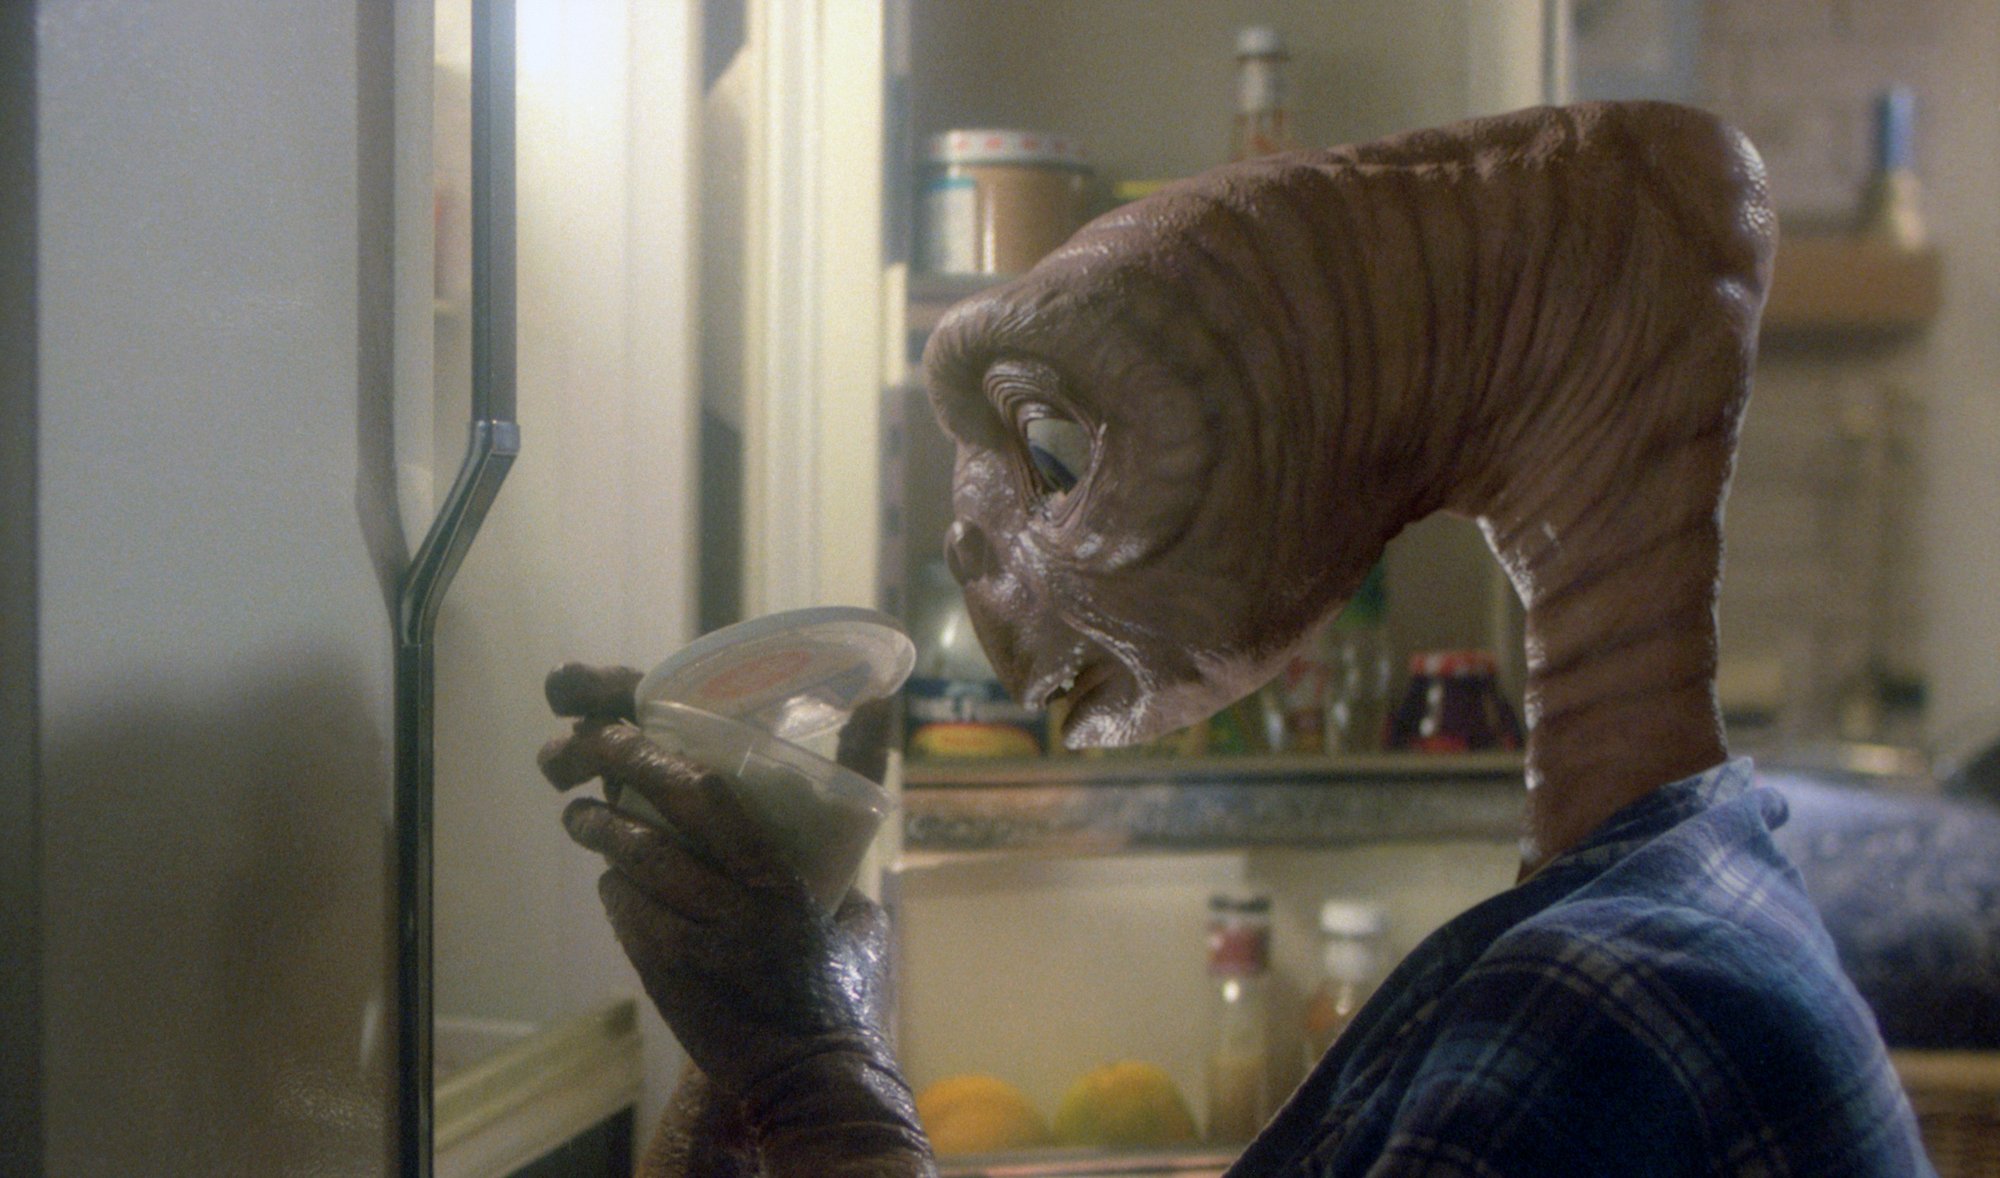 E.T. looking in the fridge in a still from 'E.T.'